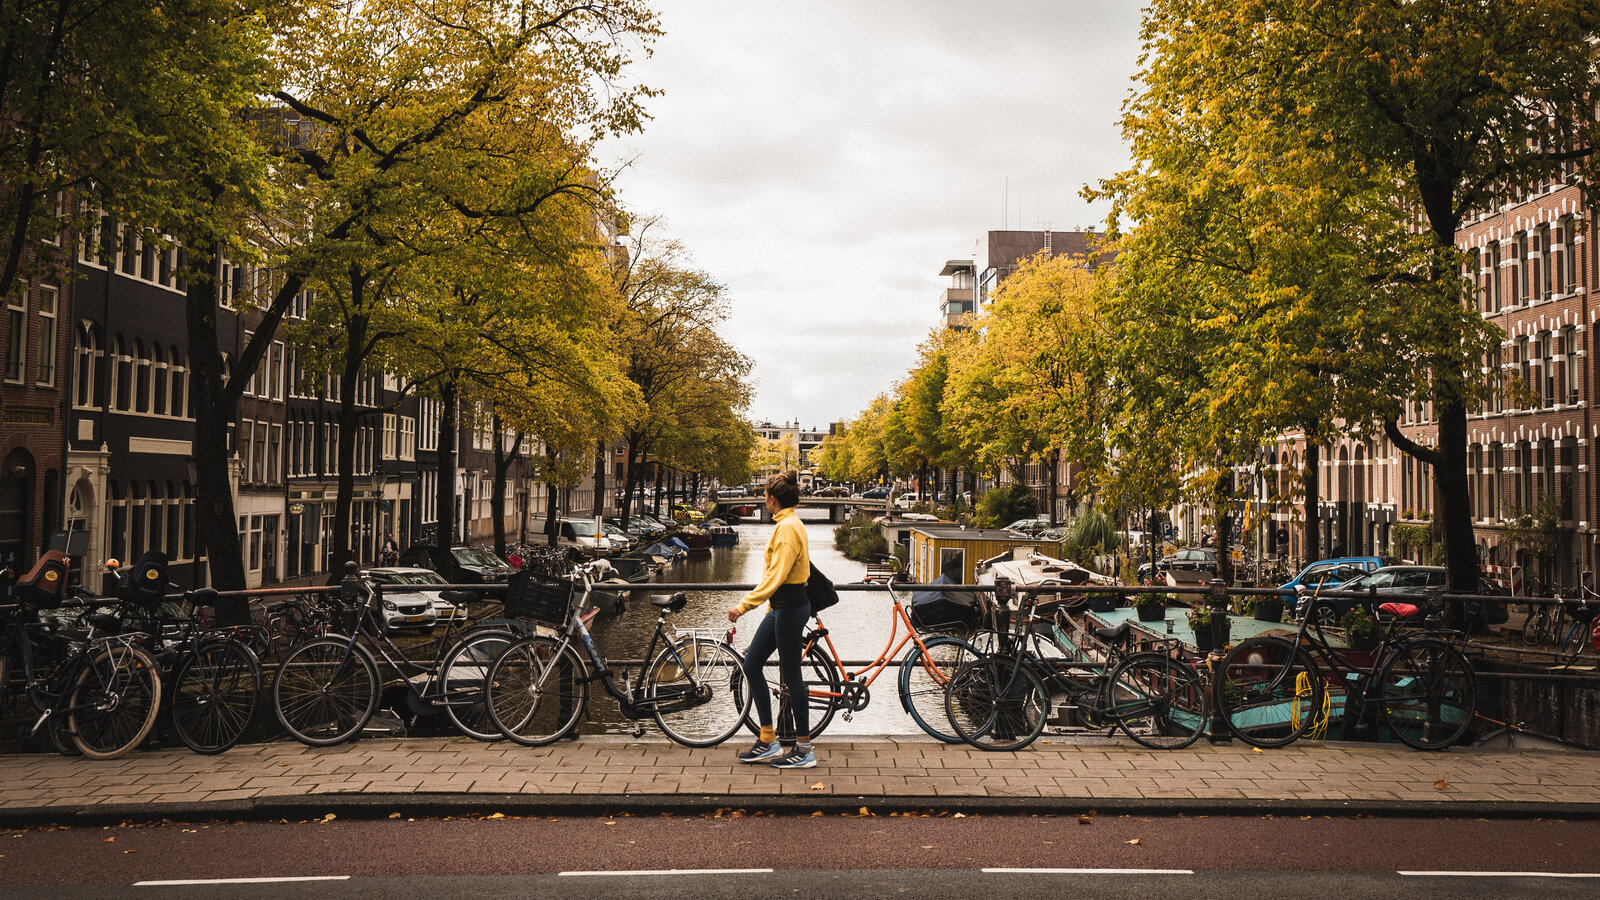 How to Obtain a Residence Permit in the Netherlands 